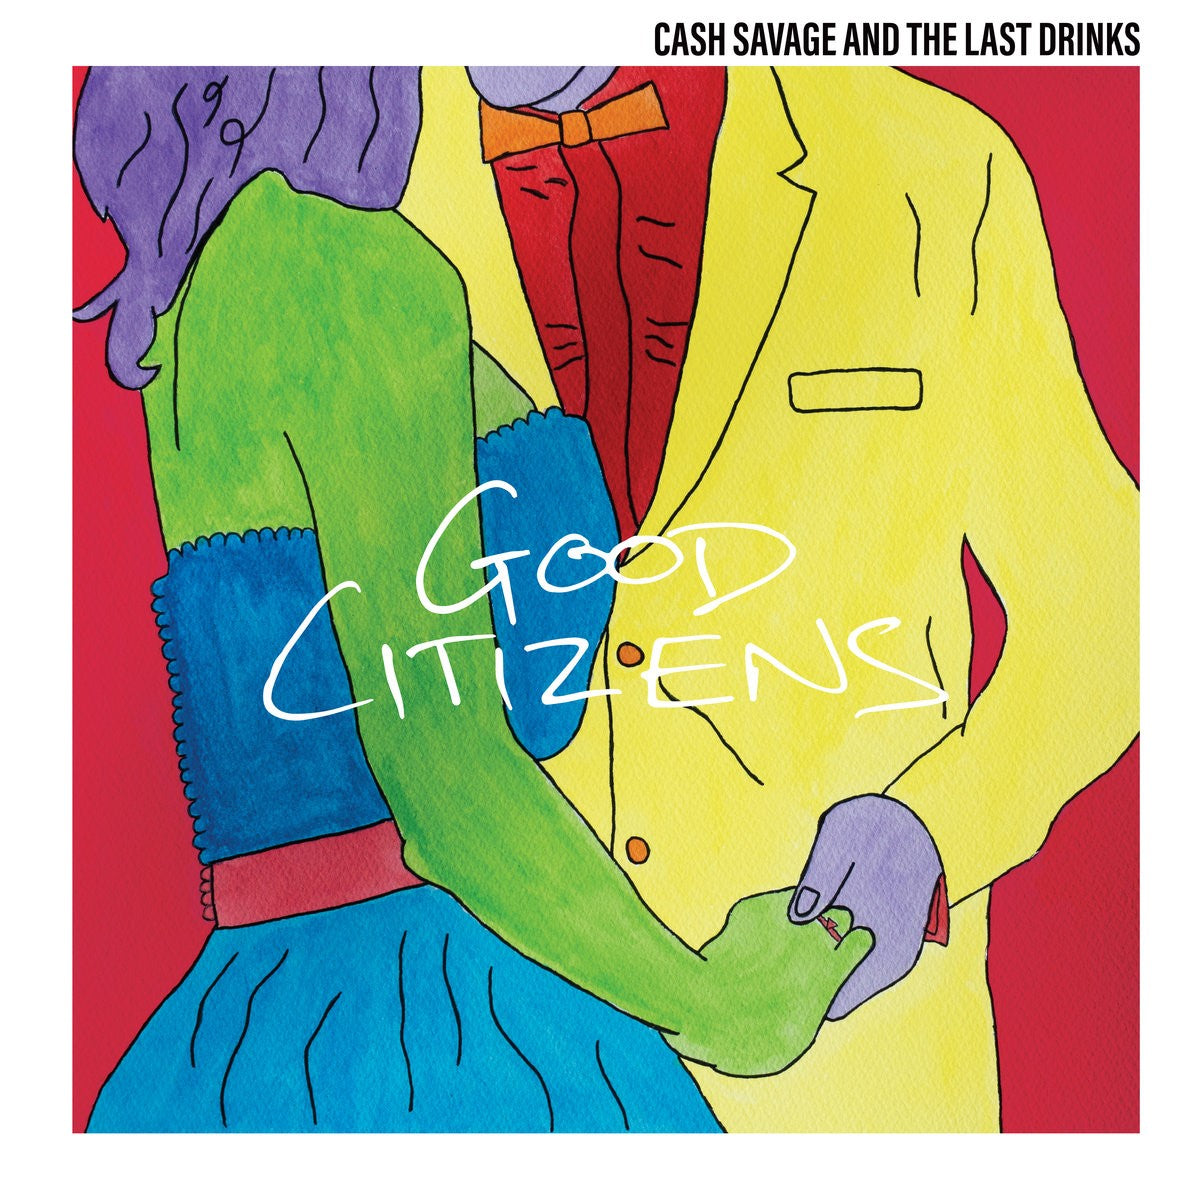 CASH SAVAGE AND THE LAST DRINKS - GOOD CITIZENS - VINYL LP - Wah Wah Records